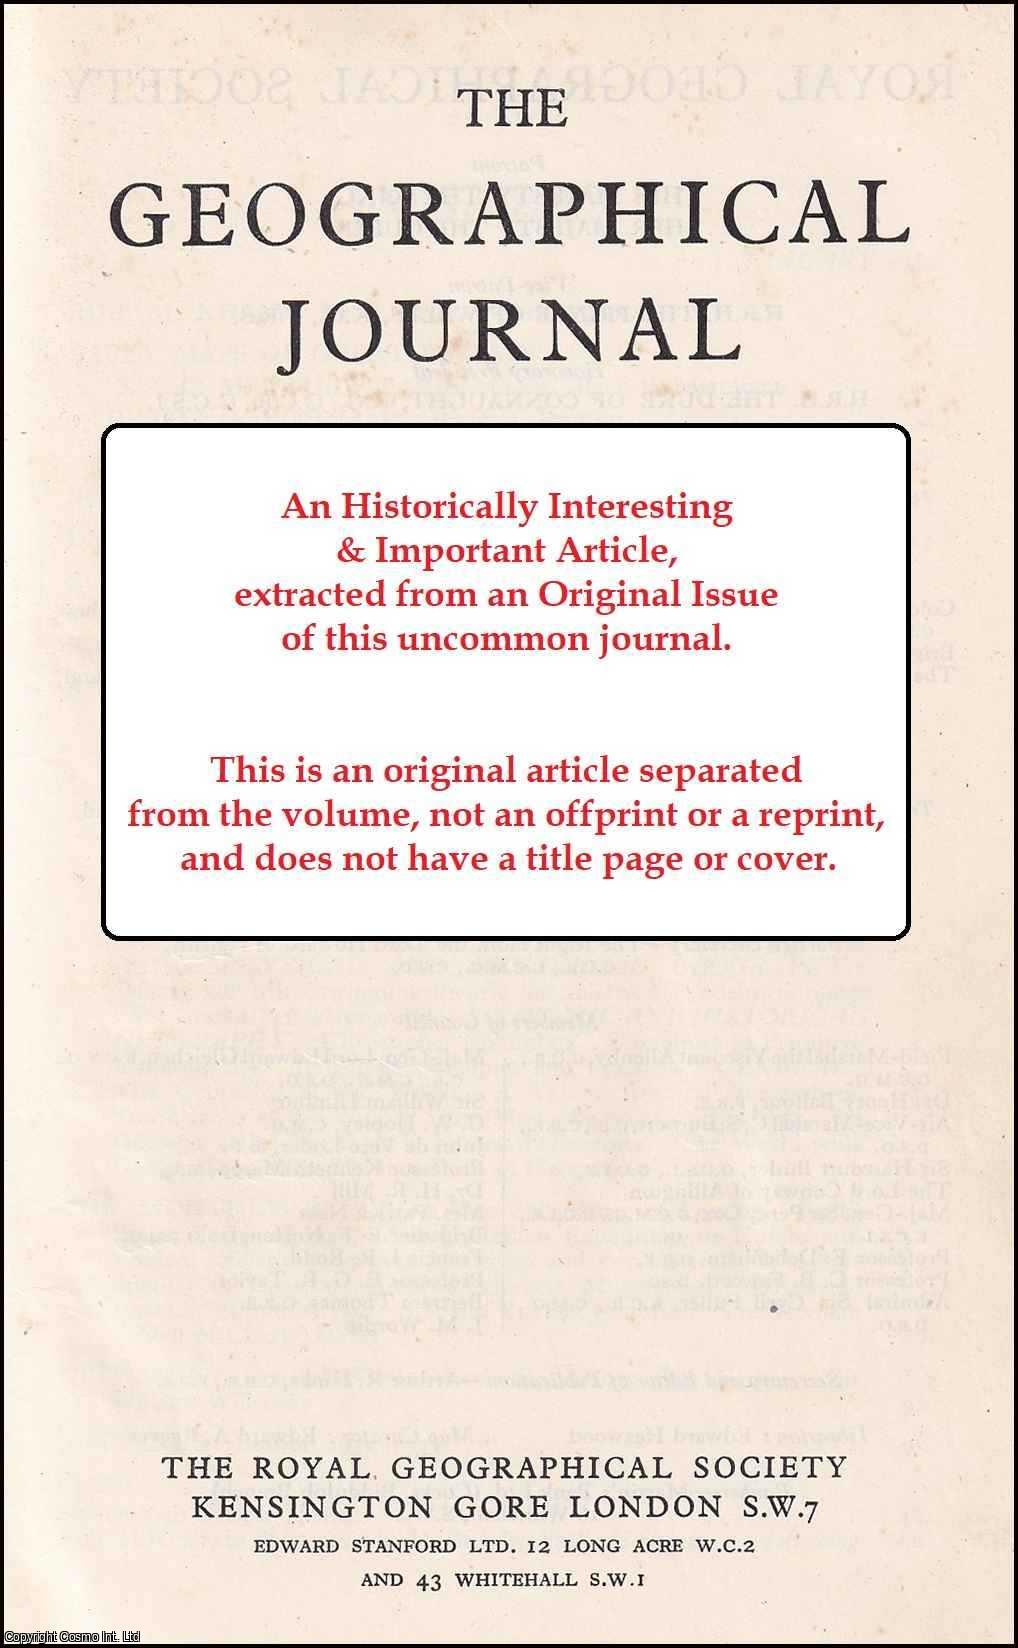 P. P. Howell - The Impact of The Jonglei Canal in The Sudan. An original article from The Geographical Journal, 1983.